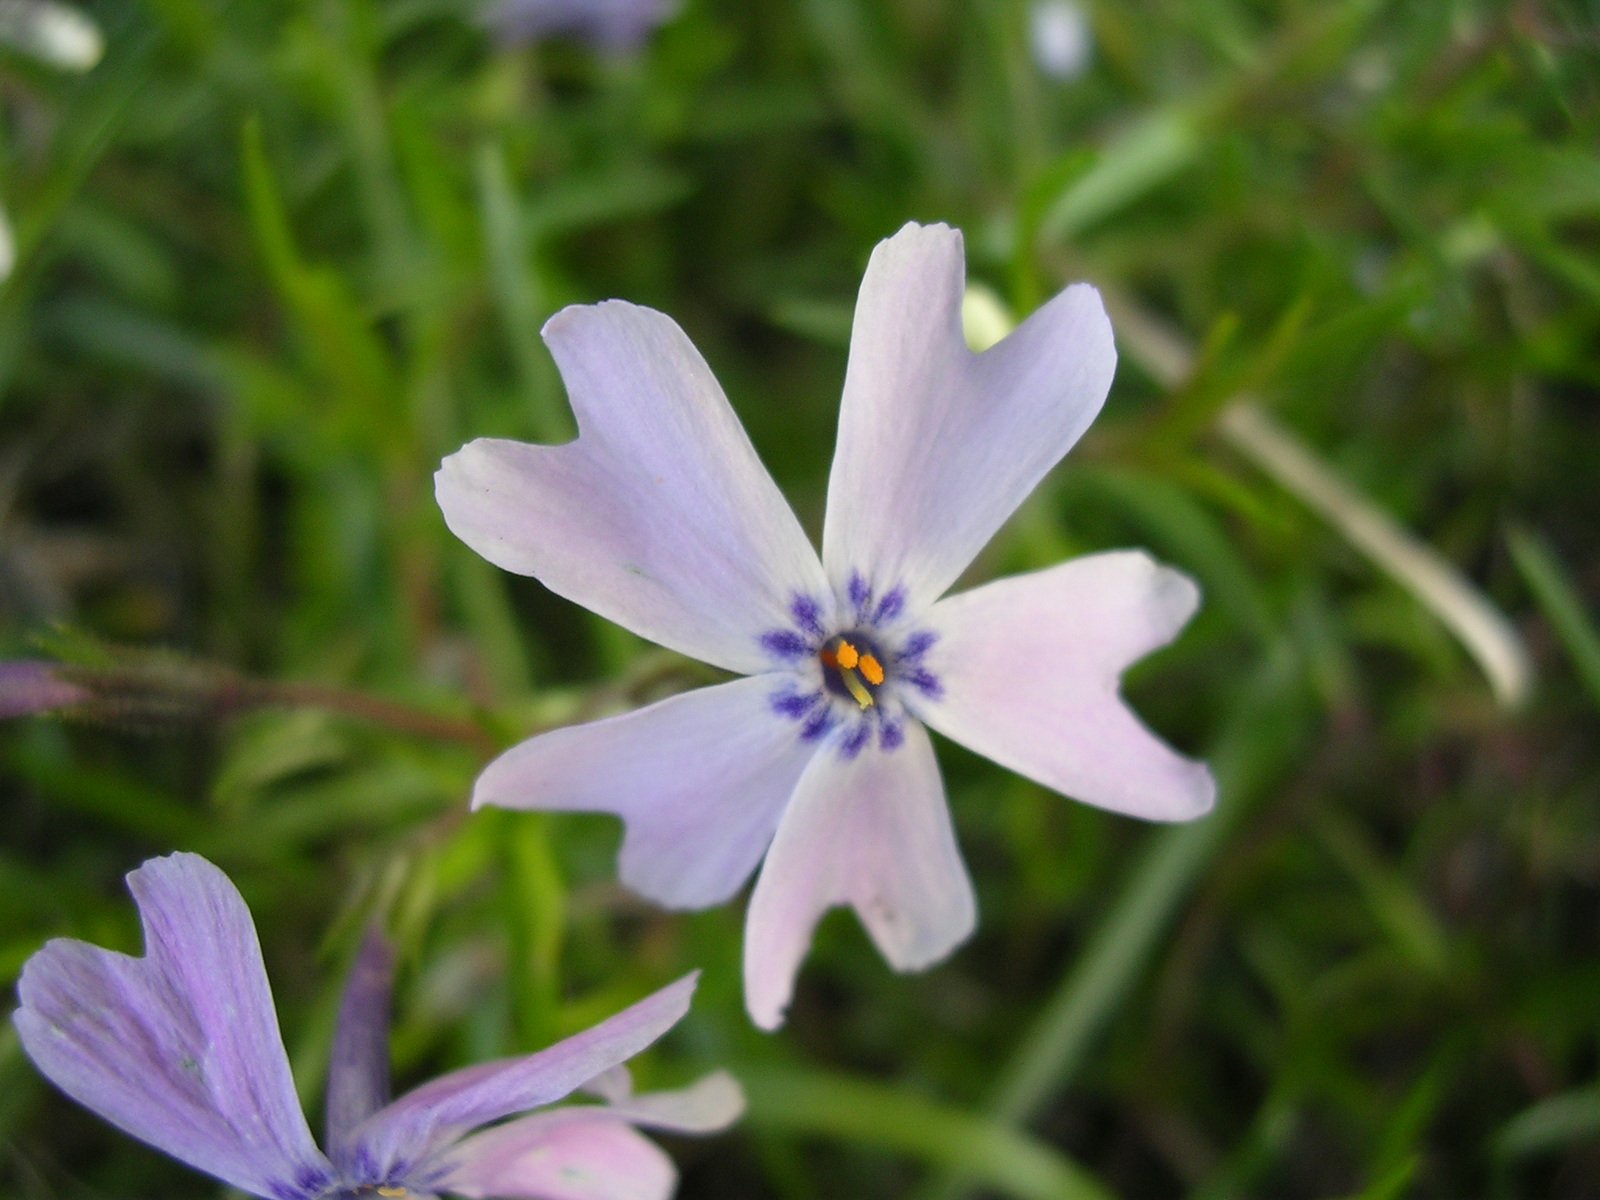 a close up of a flower with purple petals